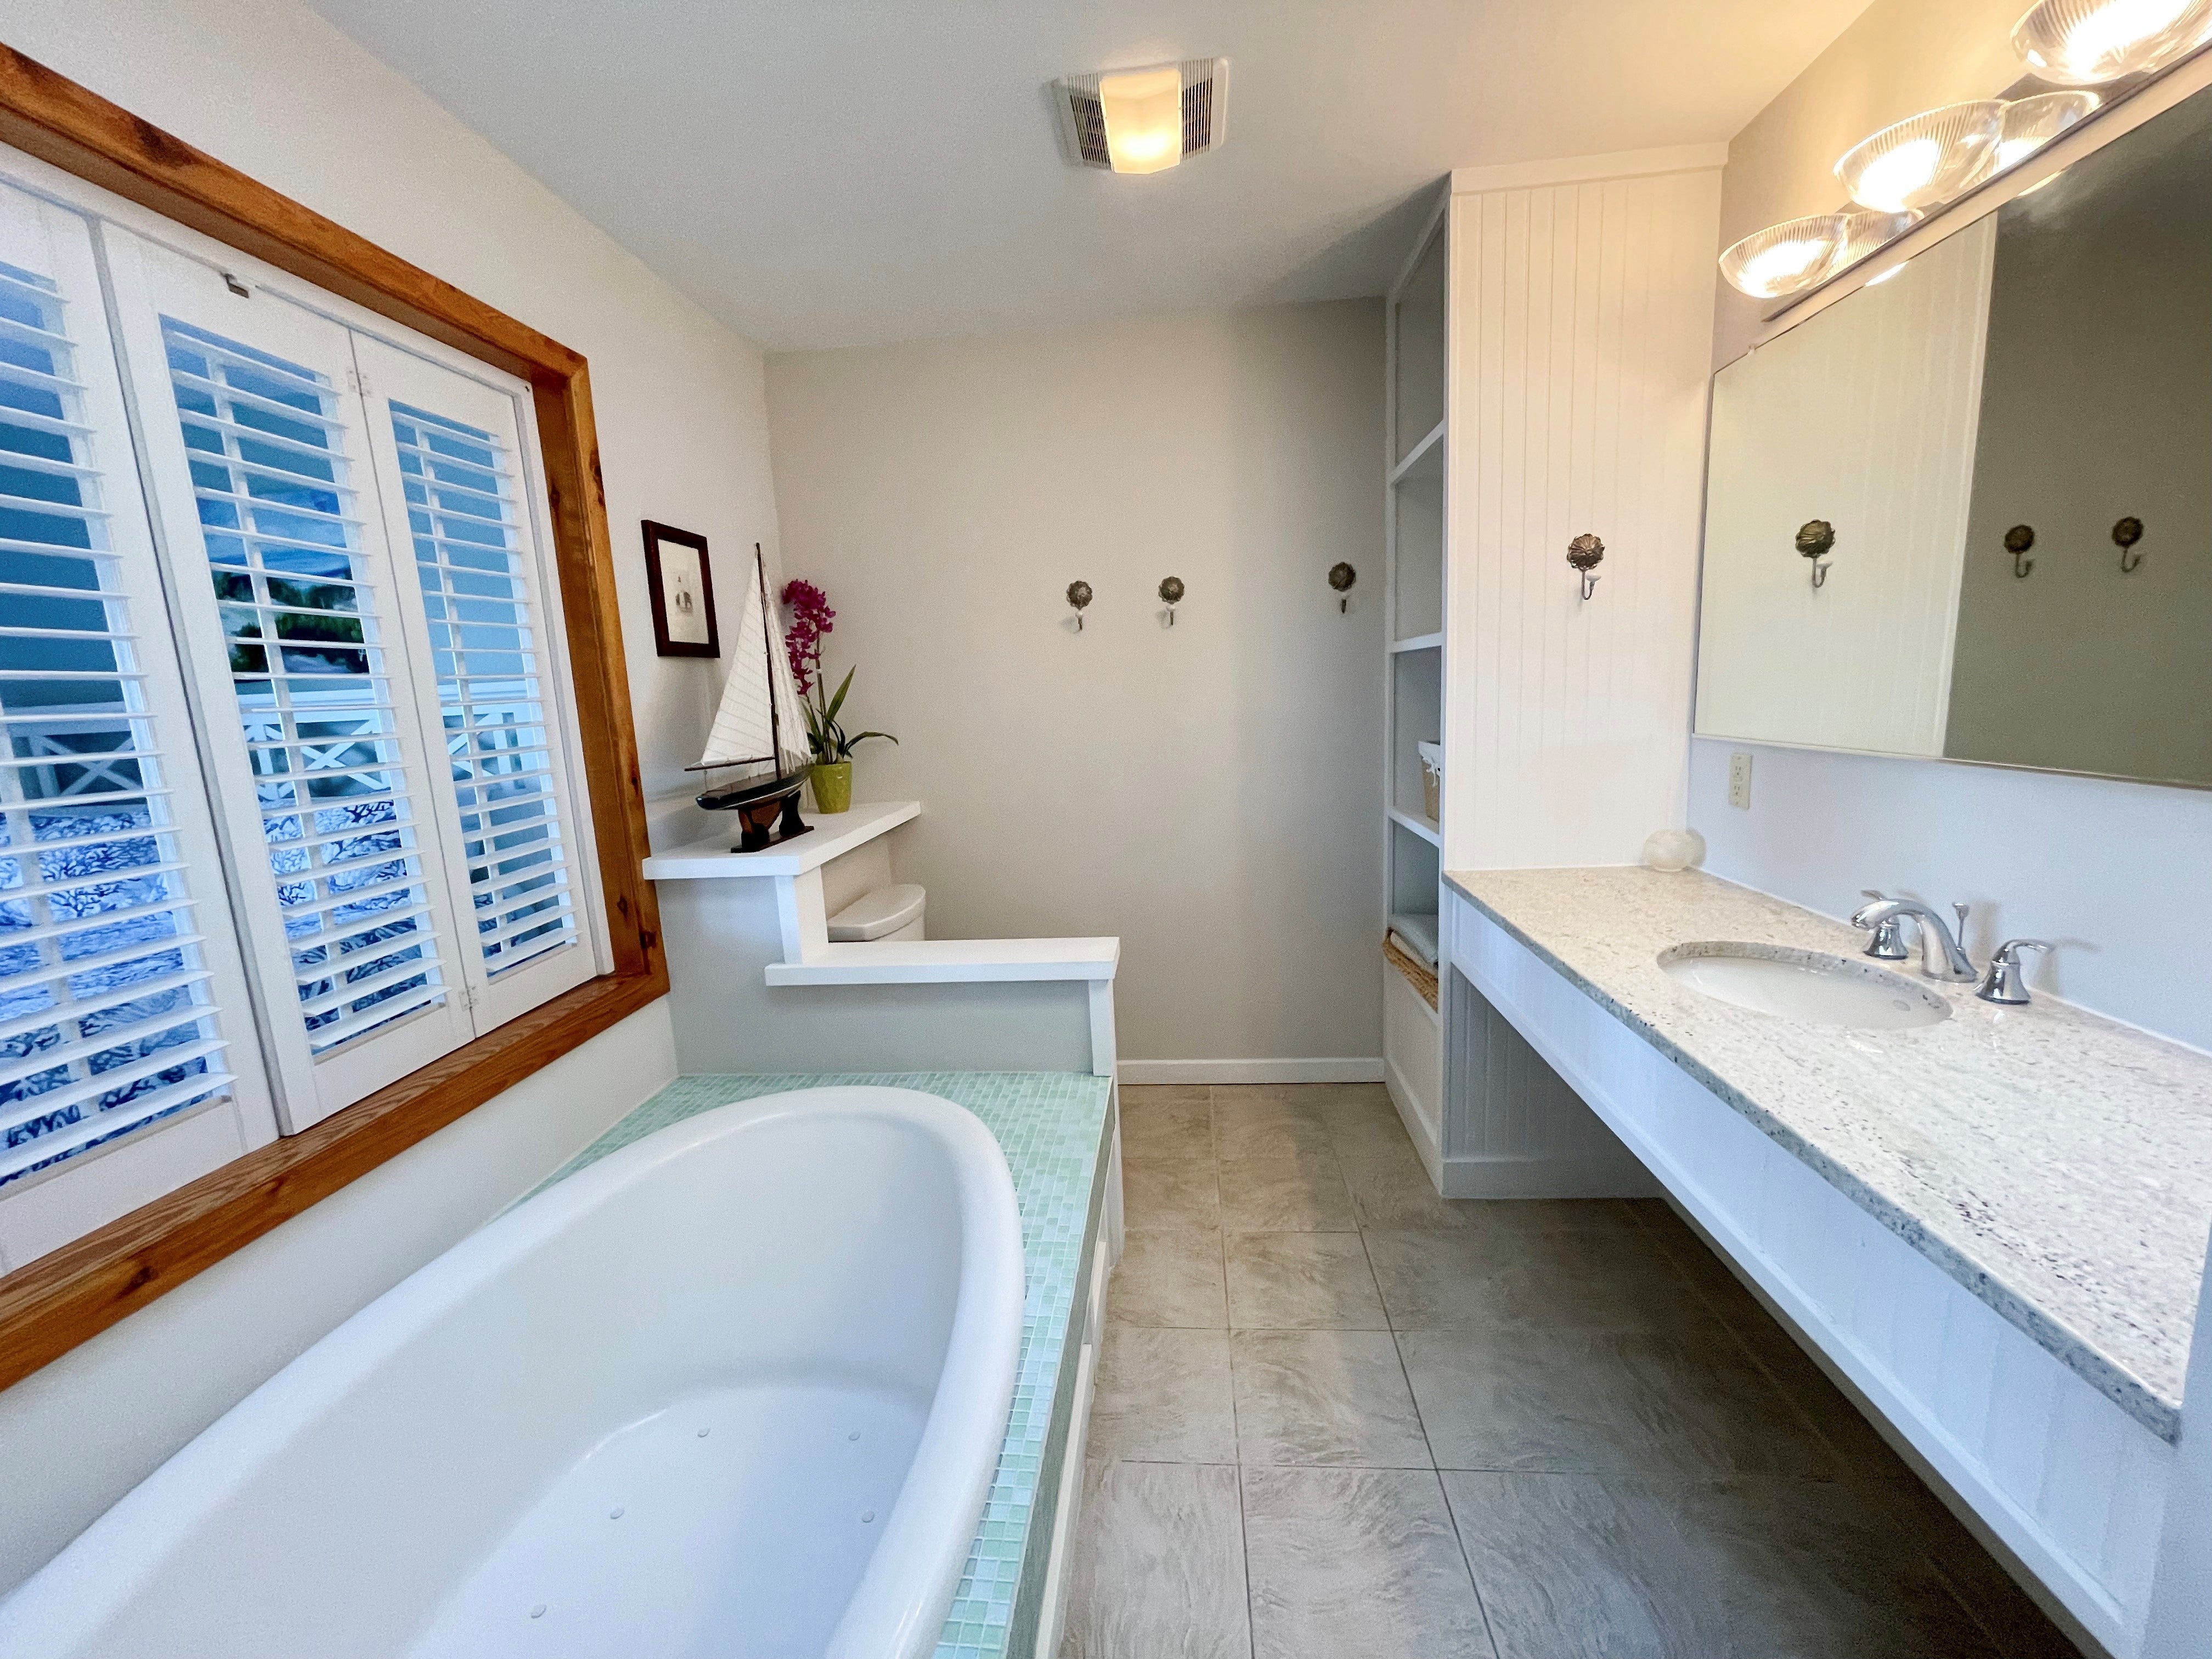 Primary Bath with Garden Tub and Separate Shower